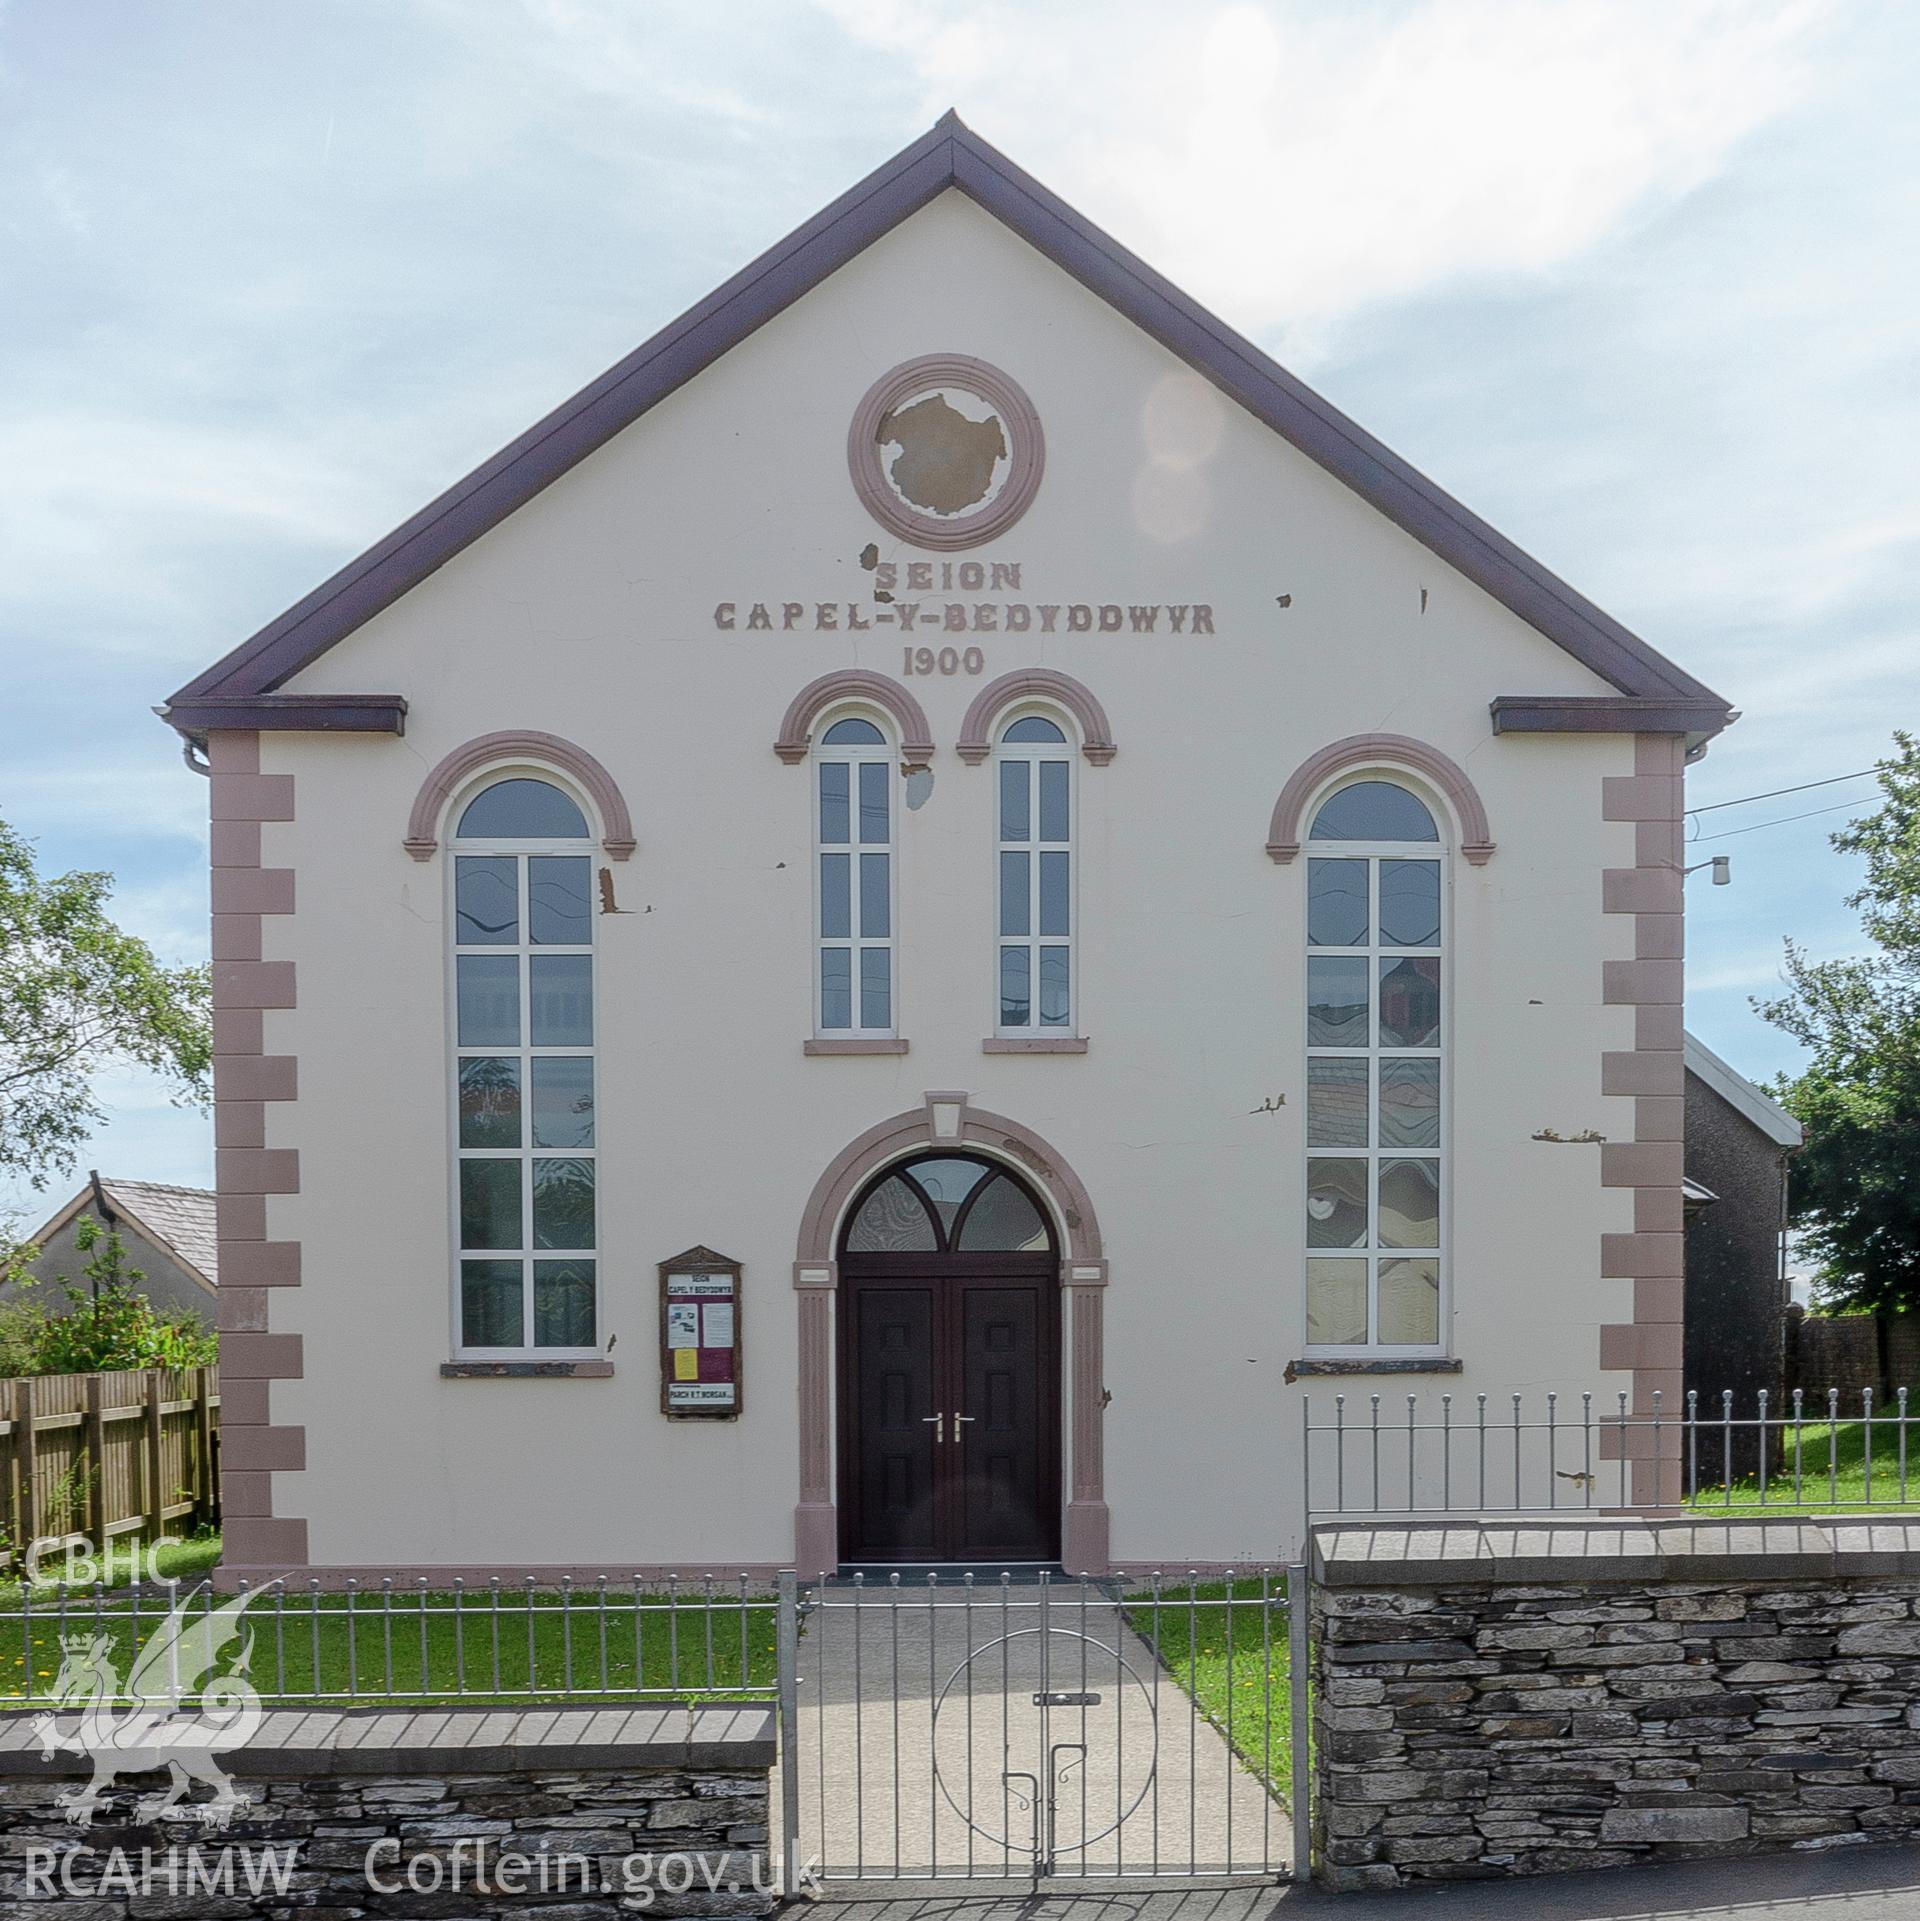 Colour photograph showing front elevation and entrance of Seion Welsh Baptist Church, Crymych. Photographed by Richard Barrett on 23rd June 2018.